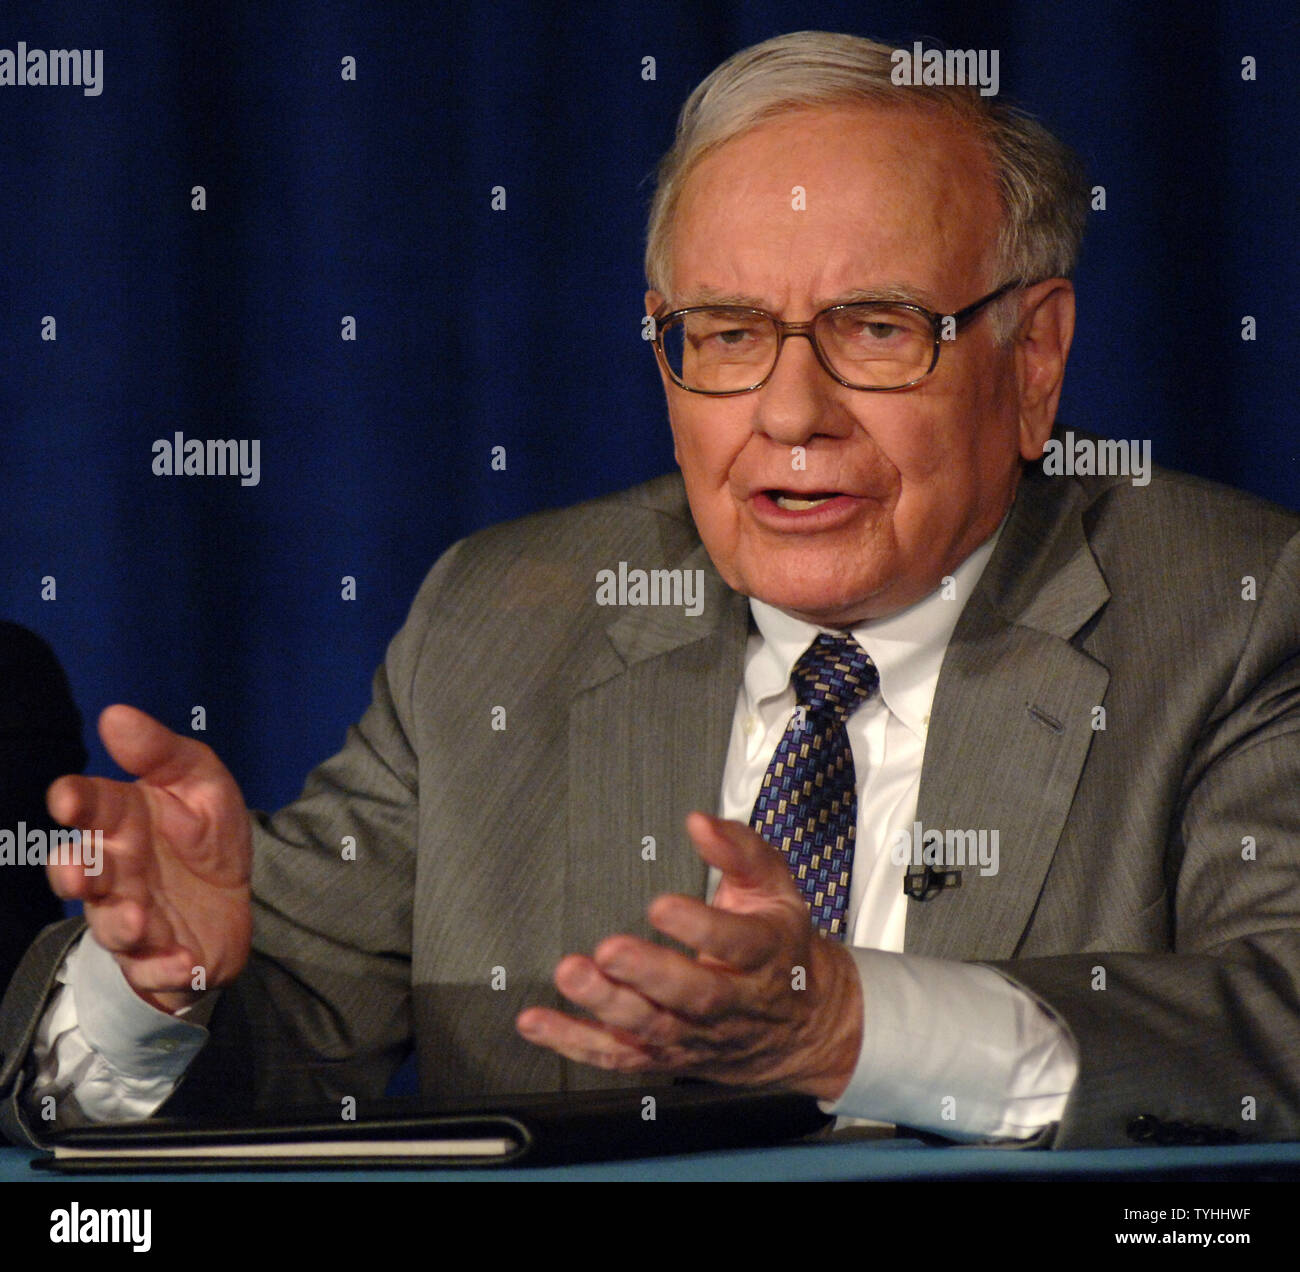 Warren Buffett, CEO of Berkshire Hathaway Inc. explains to the New York media on June 26, 2006 the reasons for donating $37 billion dollars of his fortune over the next few years to the Bill and Melinda Gates Foundation.   (UPI Photo/Ezio Petersen) Stock Photo